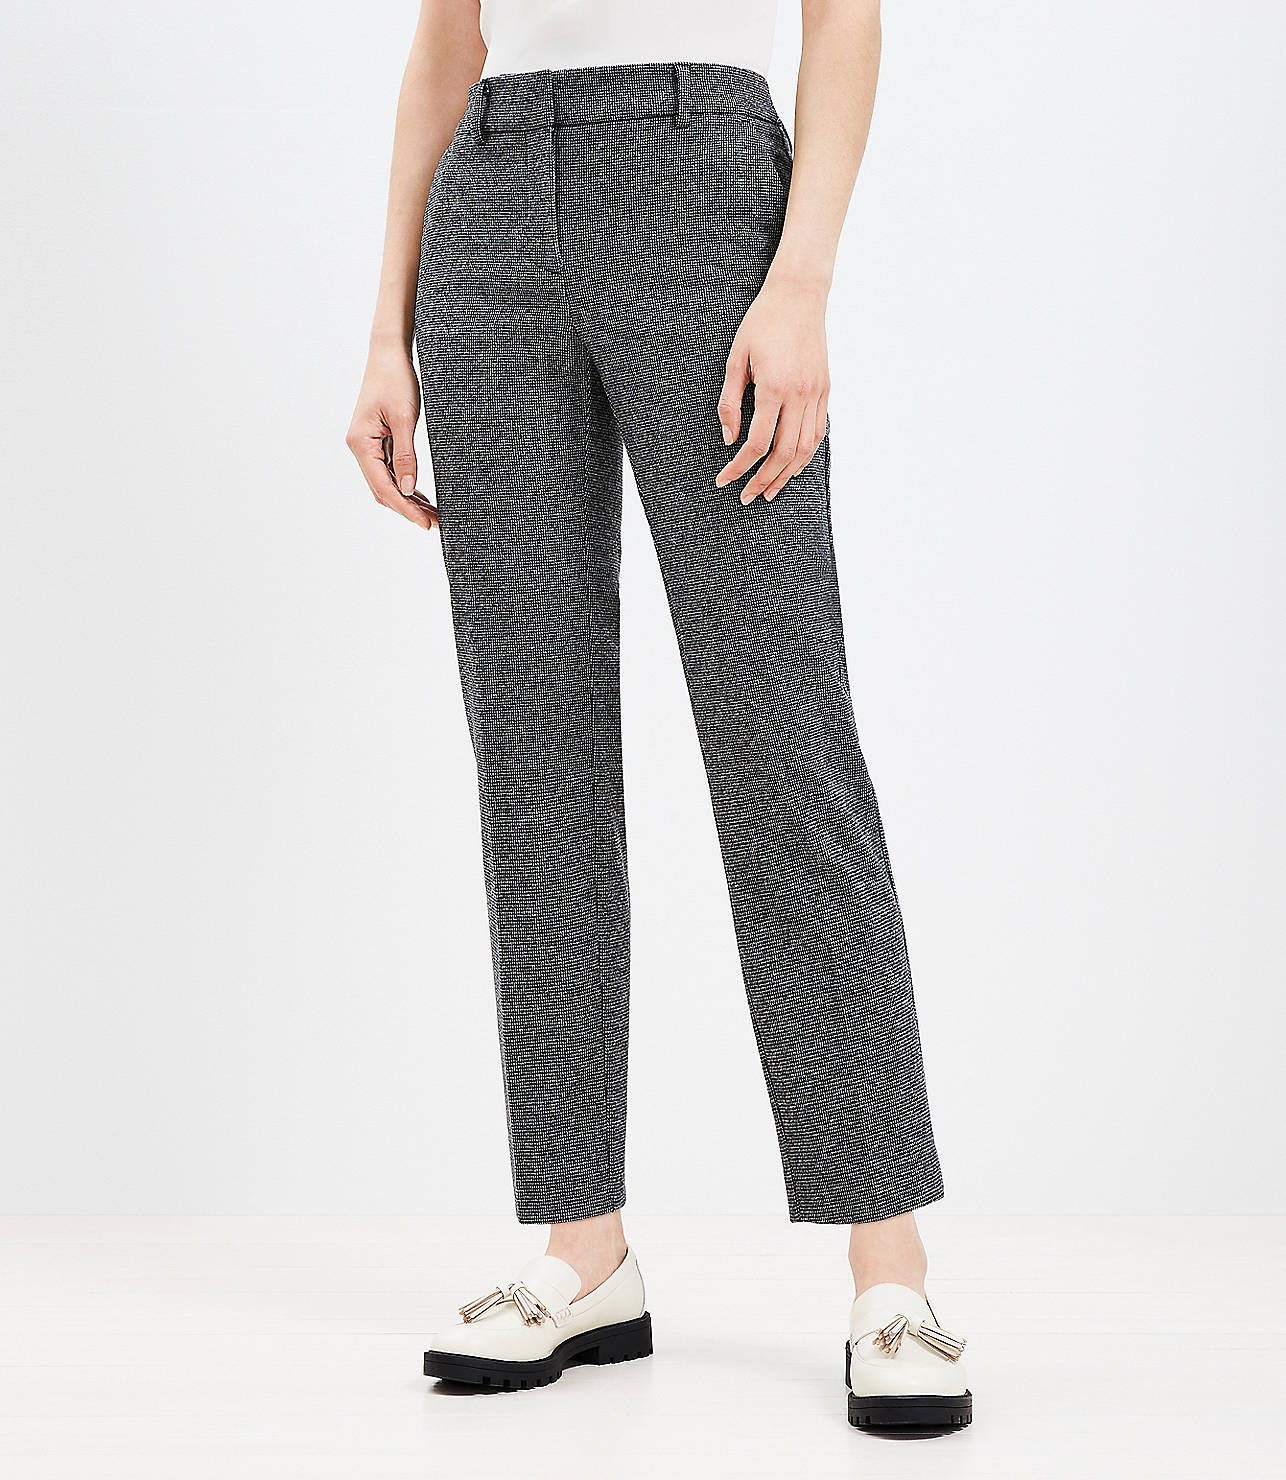 Riviera Slim Pants in Brushed Houndstooth